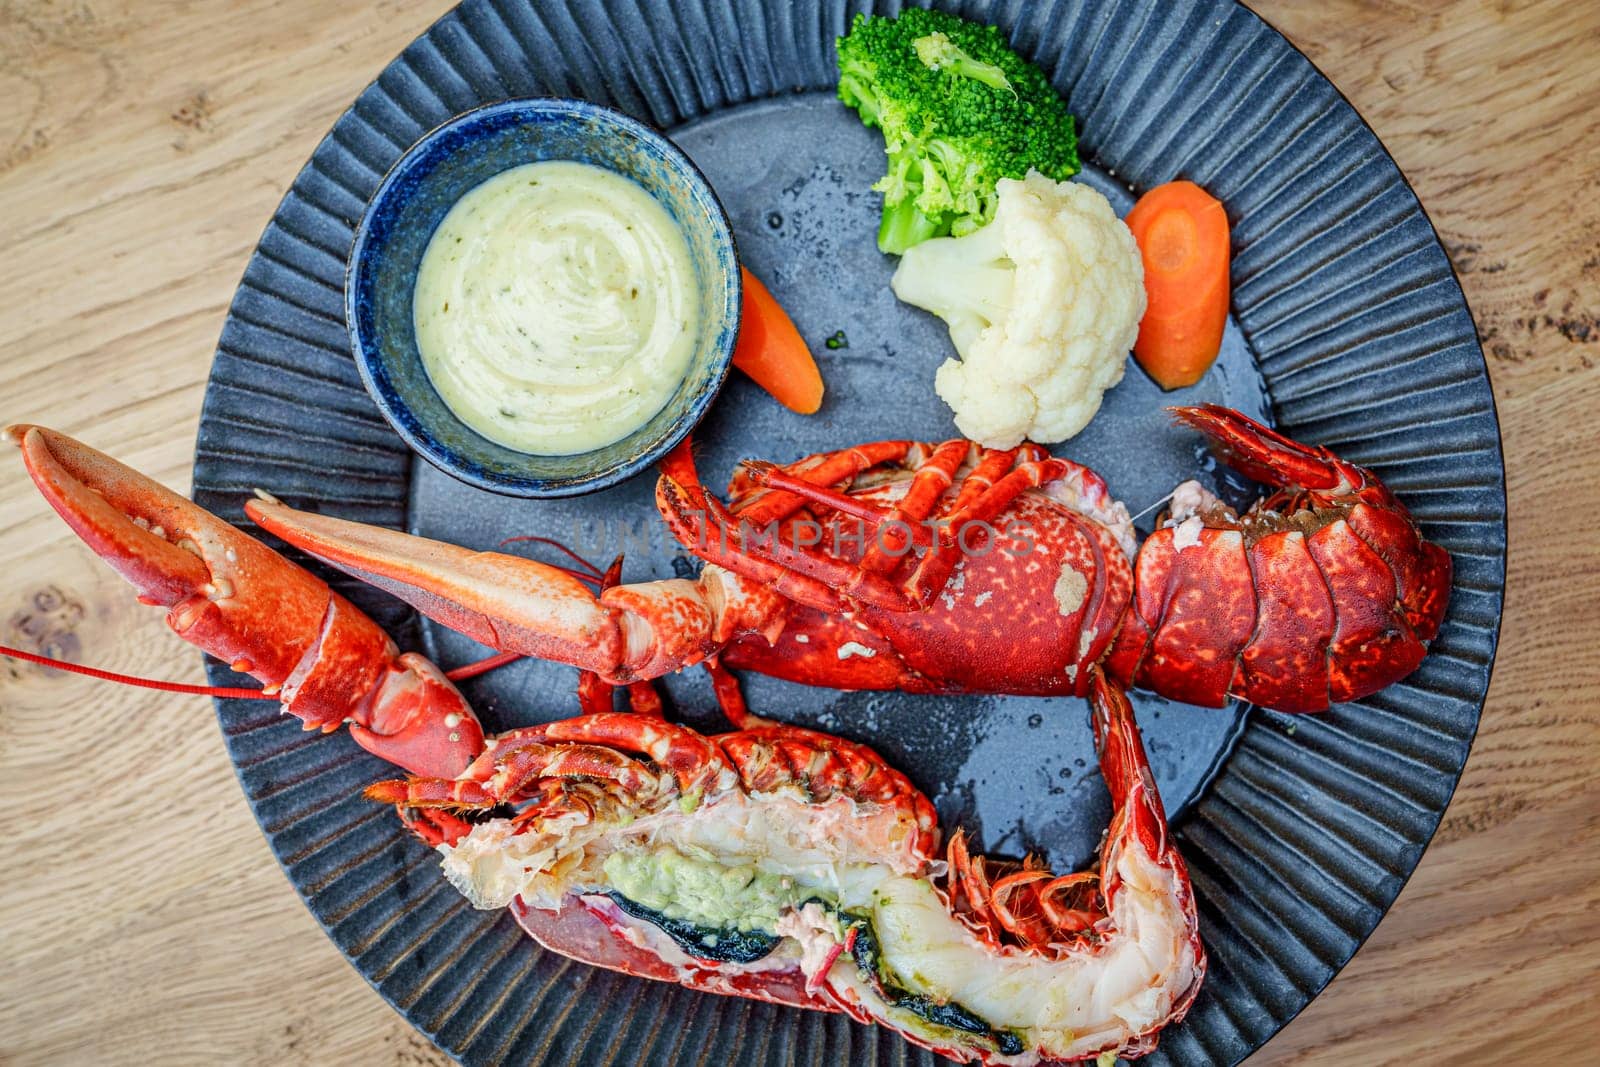 Deliciously Boiled Red Lobster Halves Served on a Stylish Black Plate at a Fine Dining Restaurant by PhotoTime